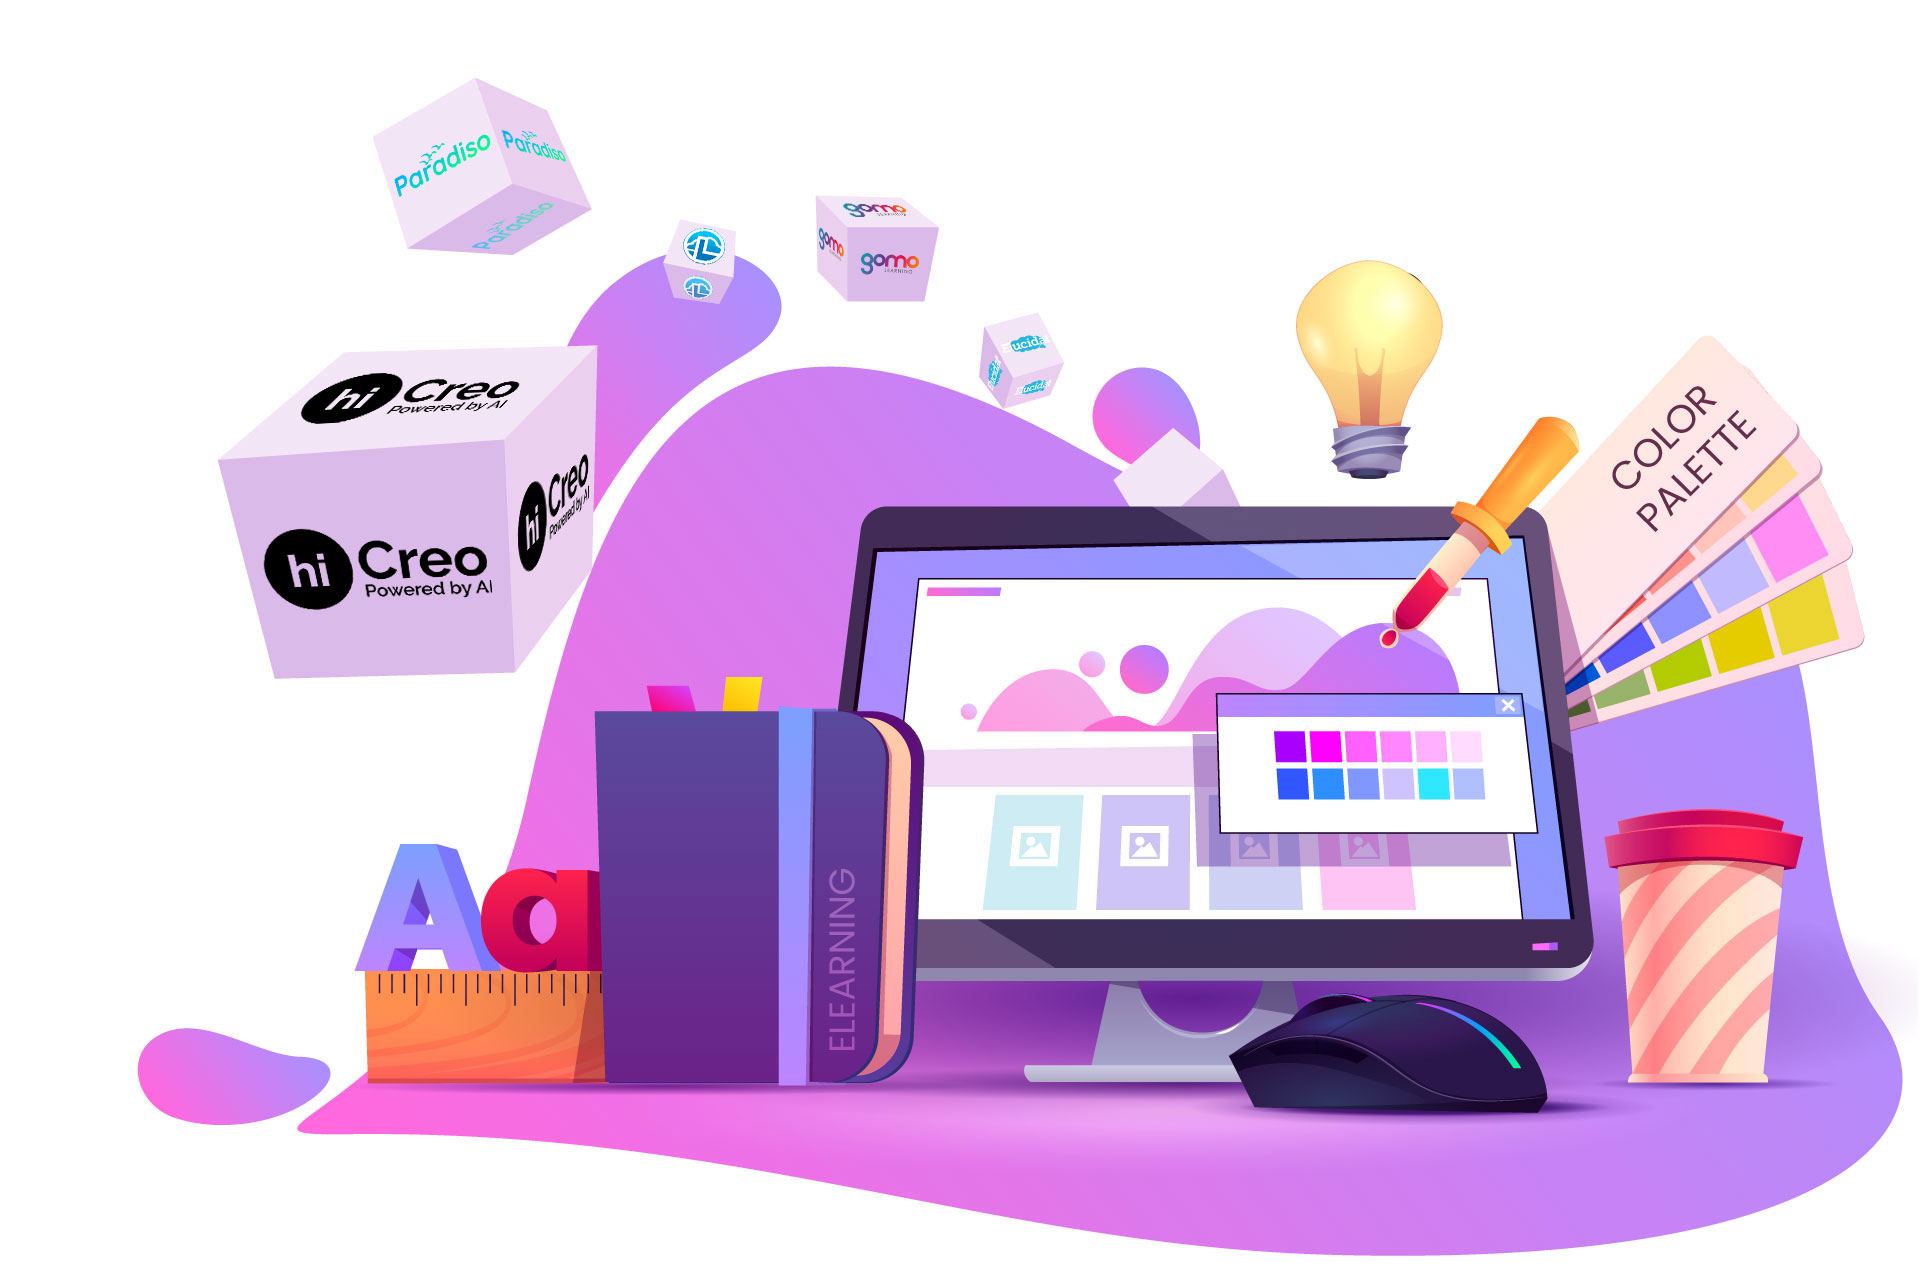 An illustration of a desktop displaying an eLearning design tool and five cubes representing the top five authoring tools for 2023: hiCreo, Paradiso, Lectora, Gomo, and Elucidat. This image showcases free eLearning tools that are currently popular in the market.